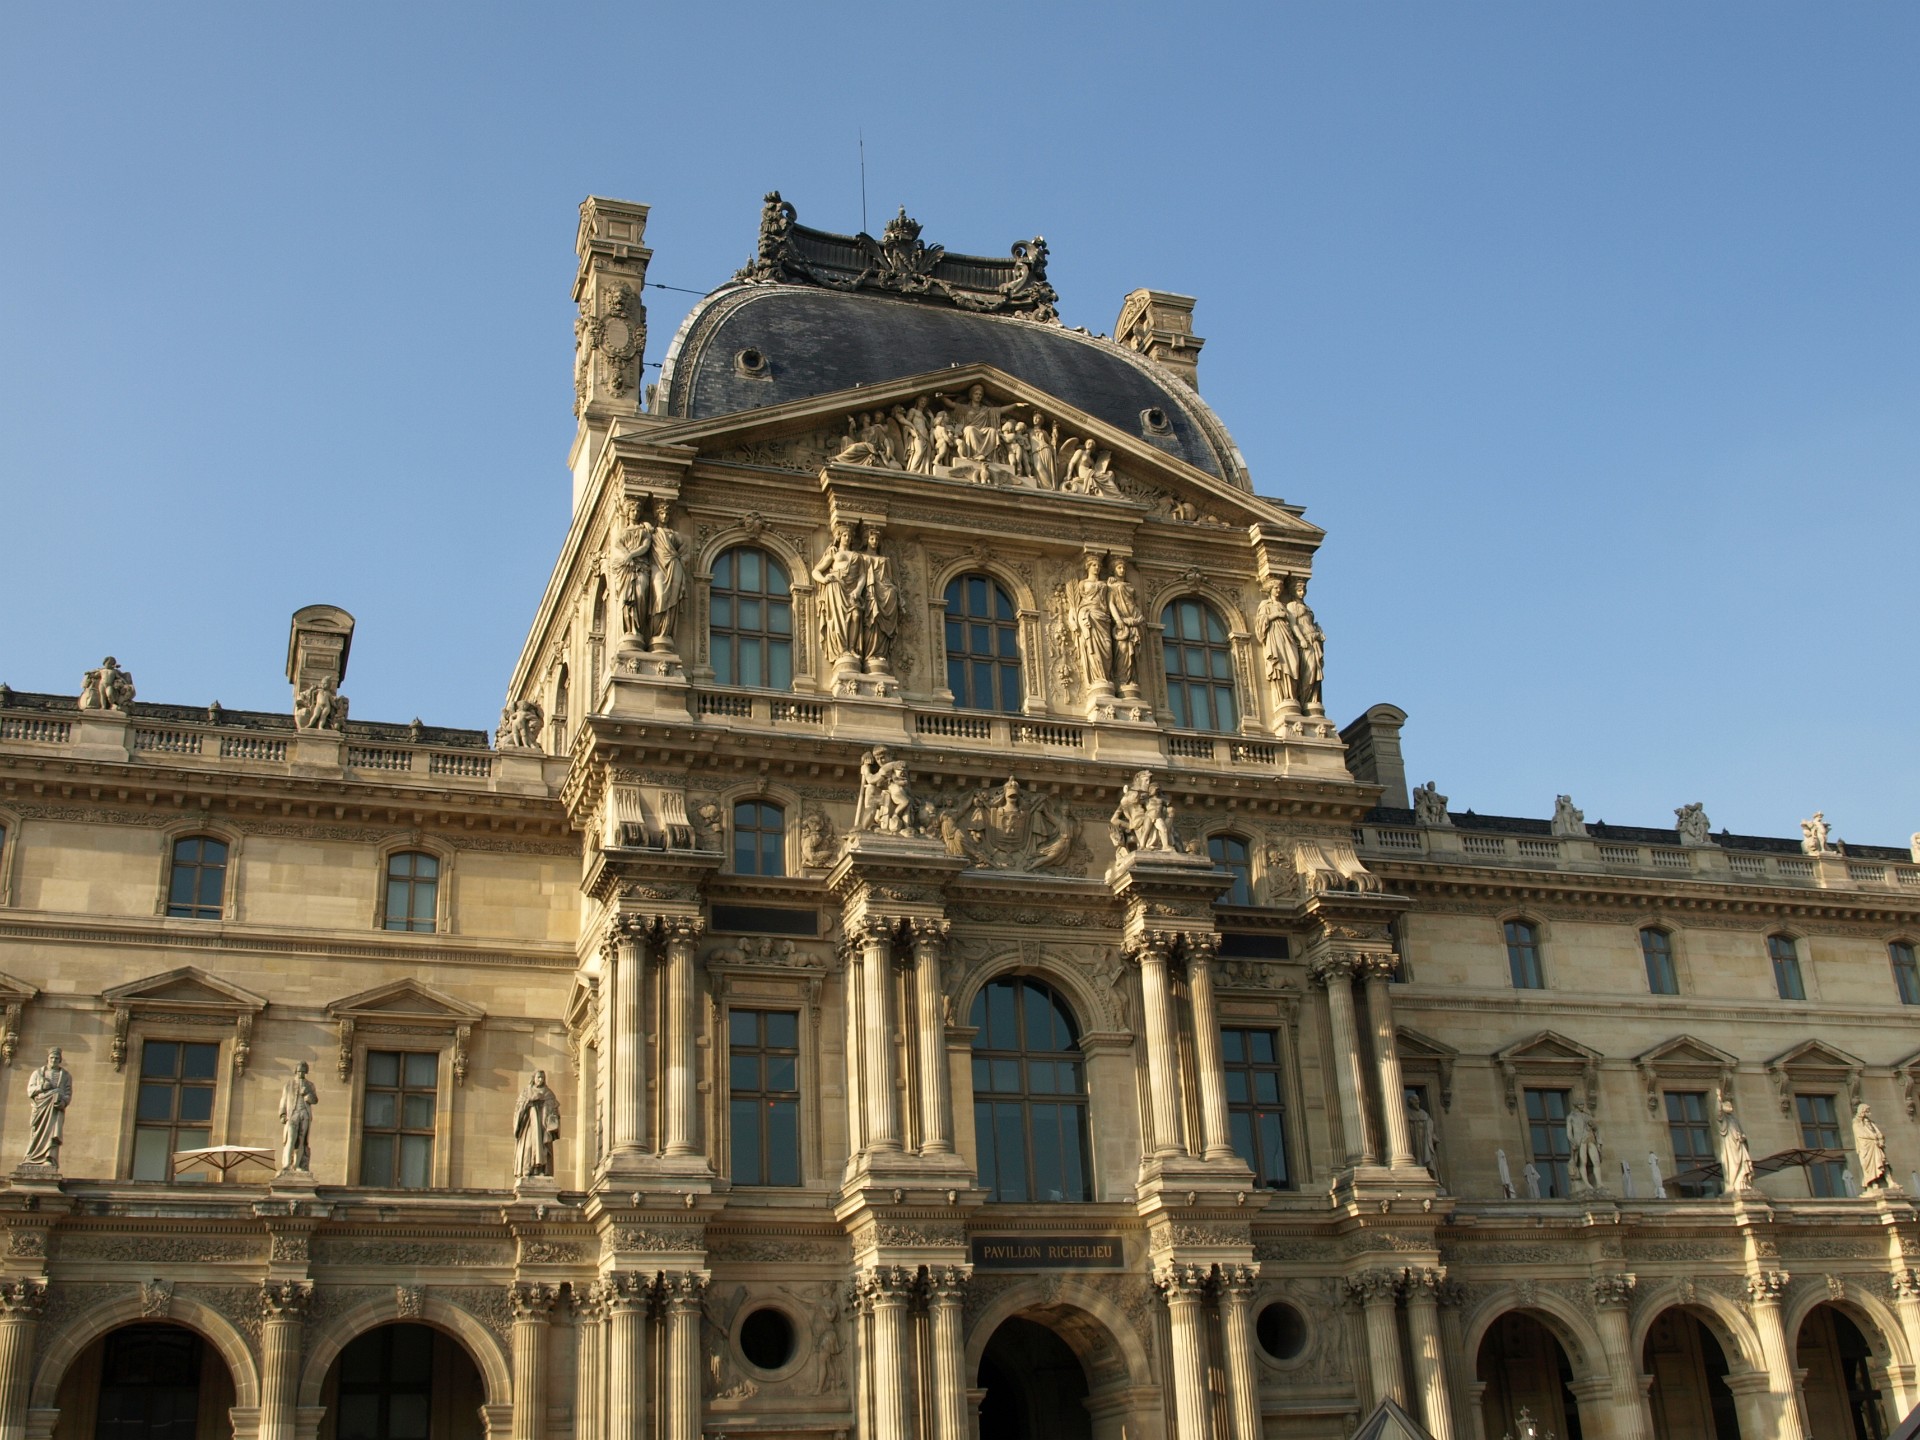 Ornate Tower on the Richelieu Side of the Louvre